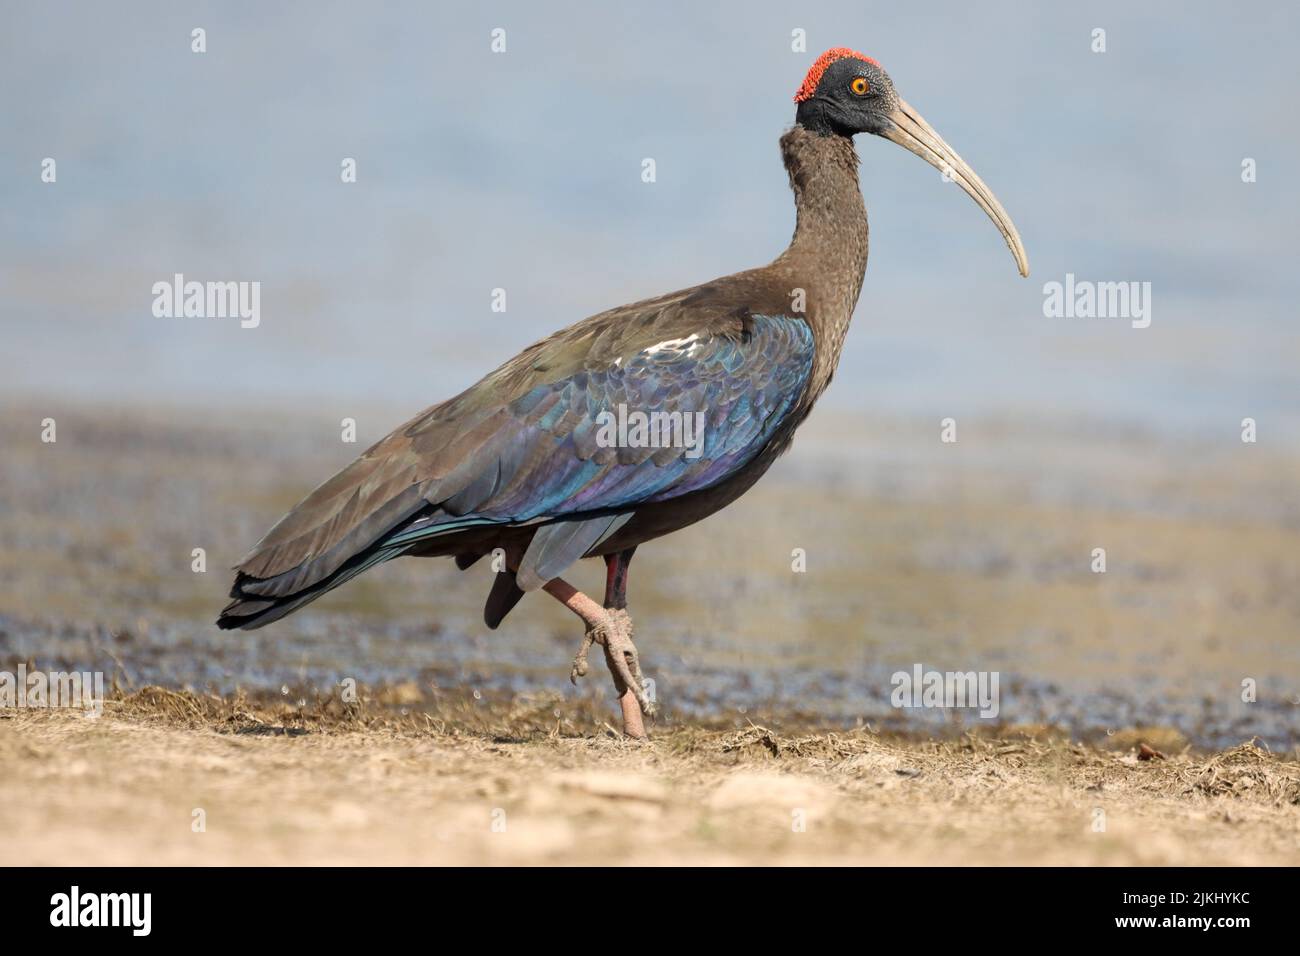 A glossy ibis bird perched on a lake shore Stock Photo